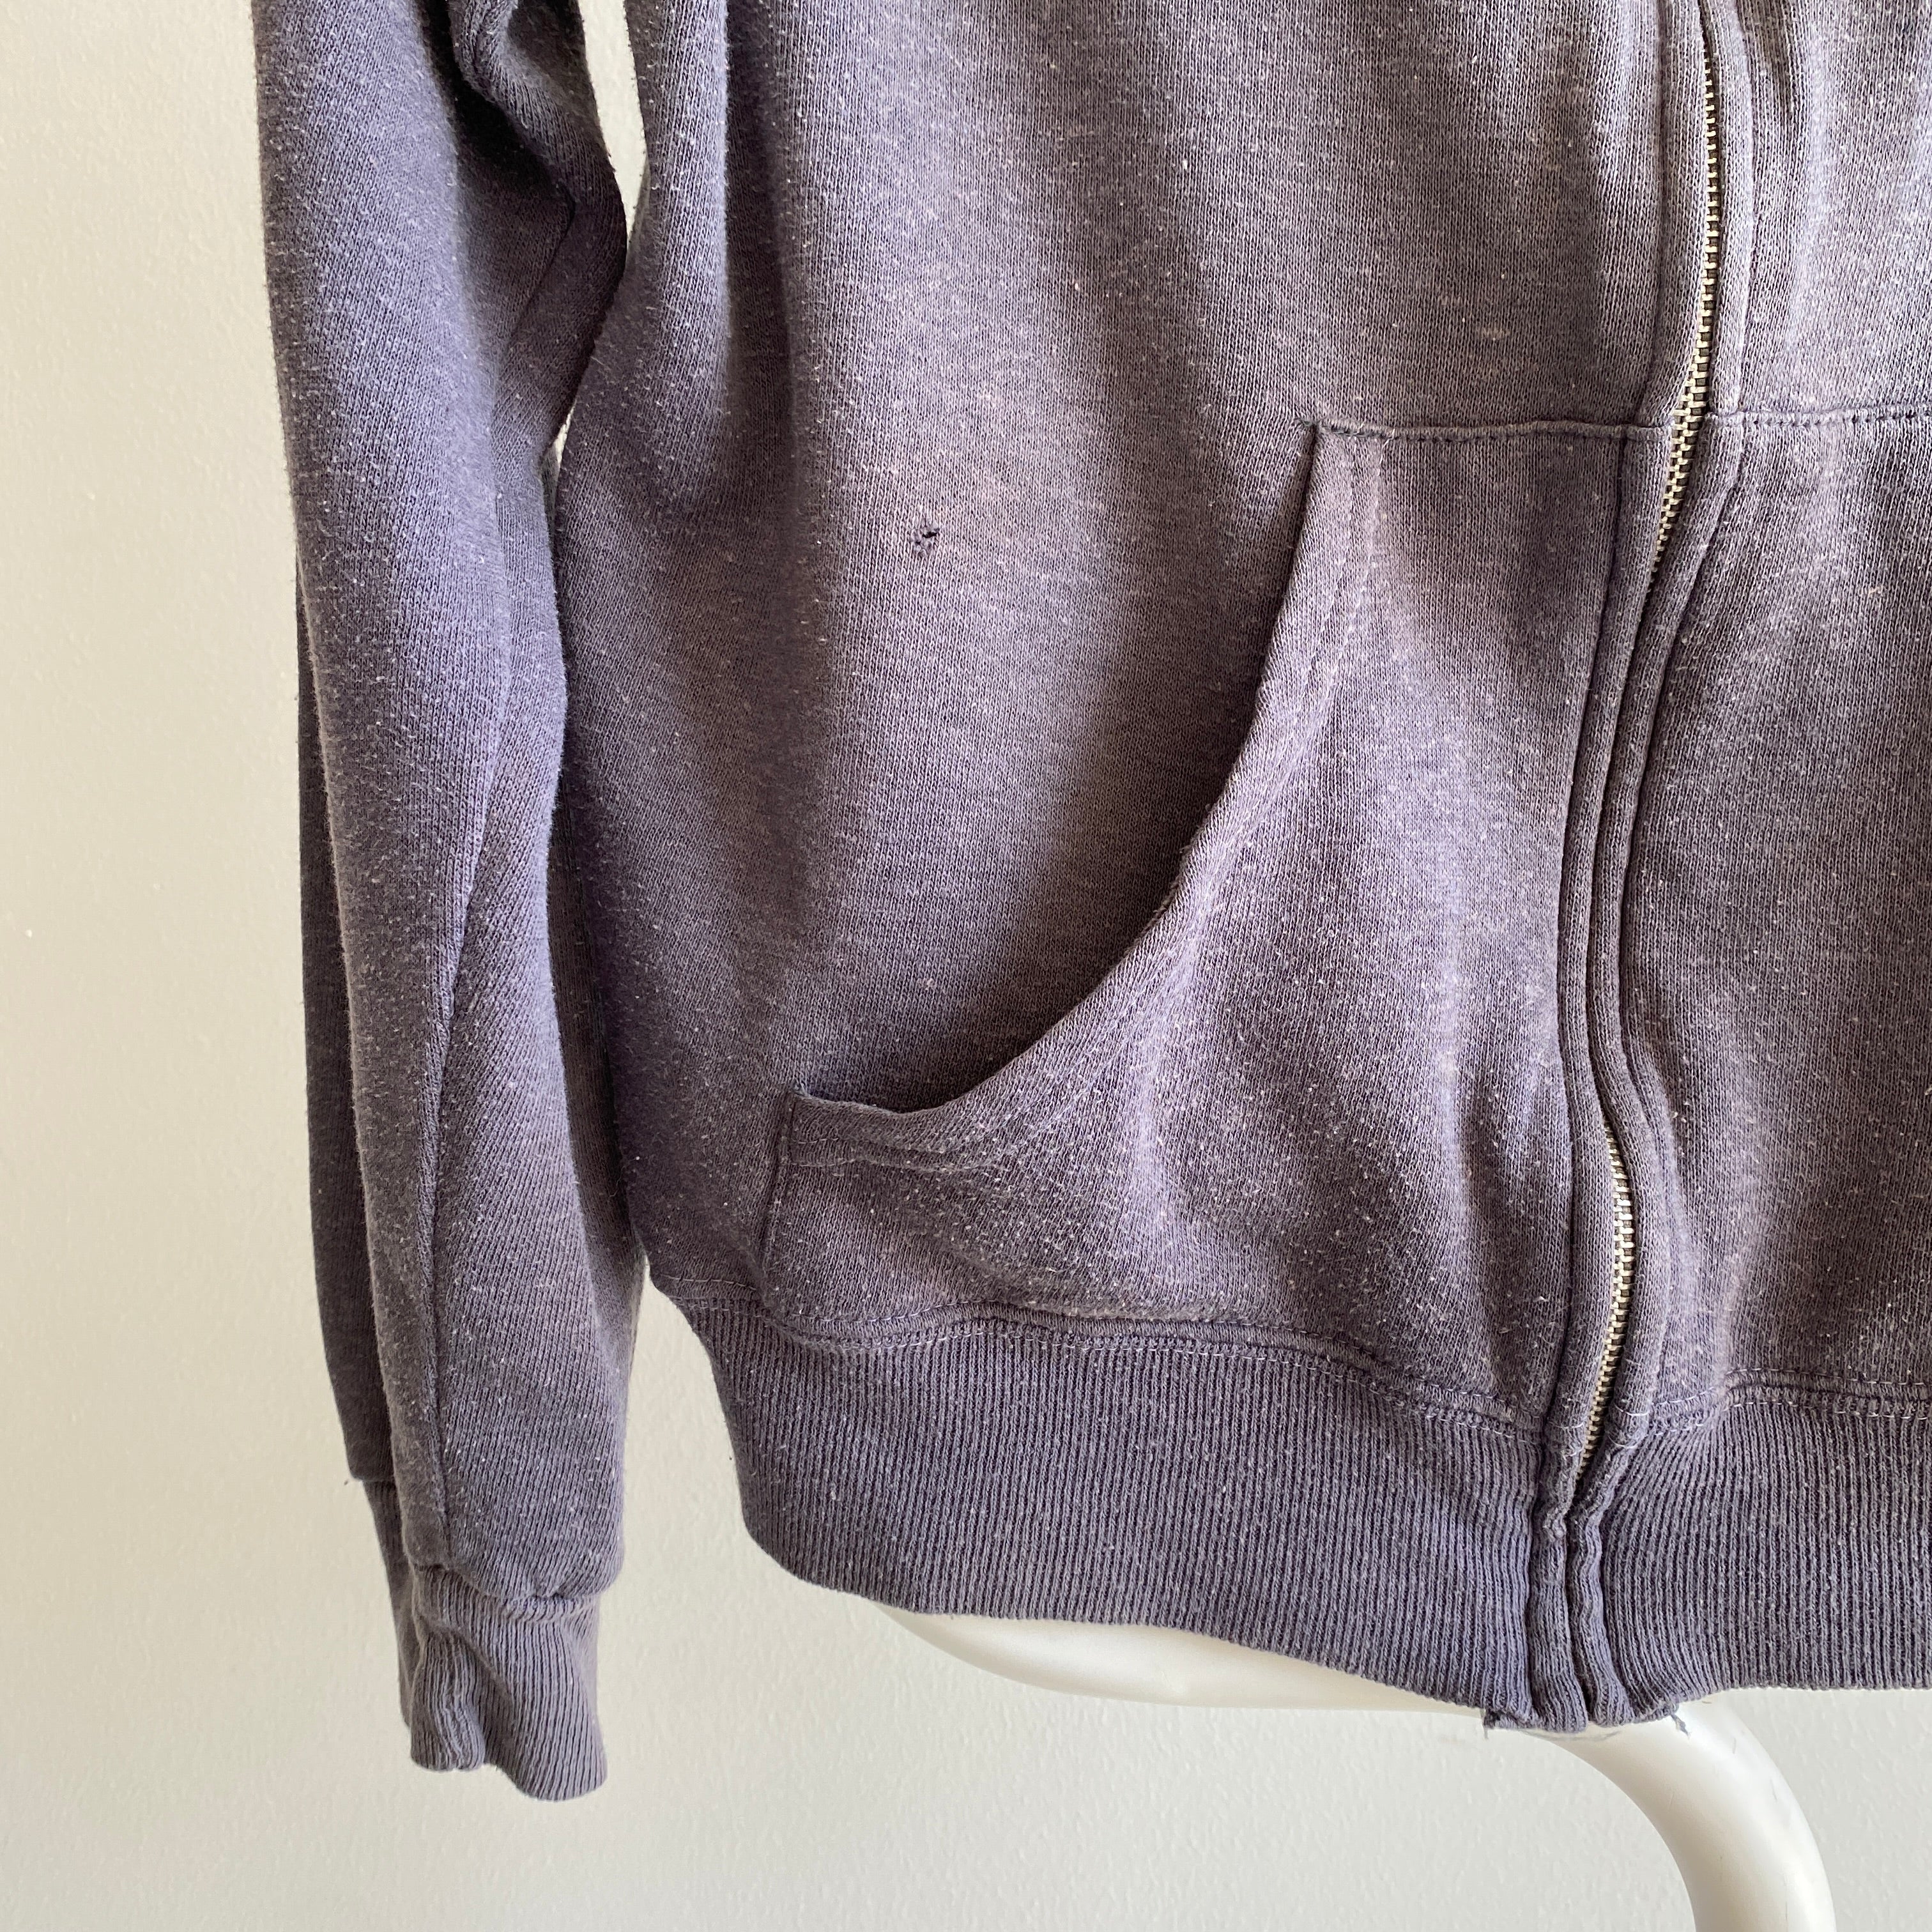 1970/80s Faded Blue/Gray Zip Up Hoodie with Belled Sleeves at Cuff - Swoon